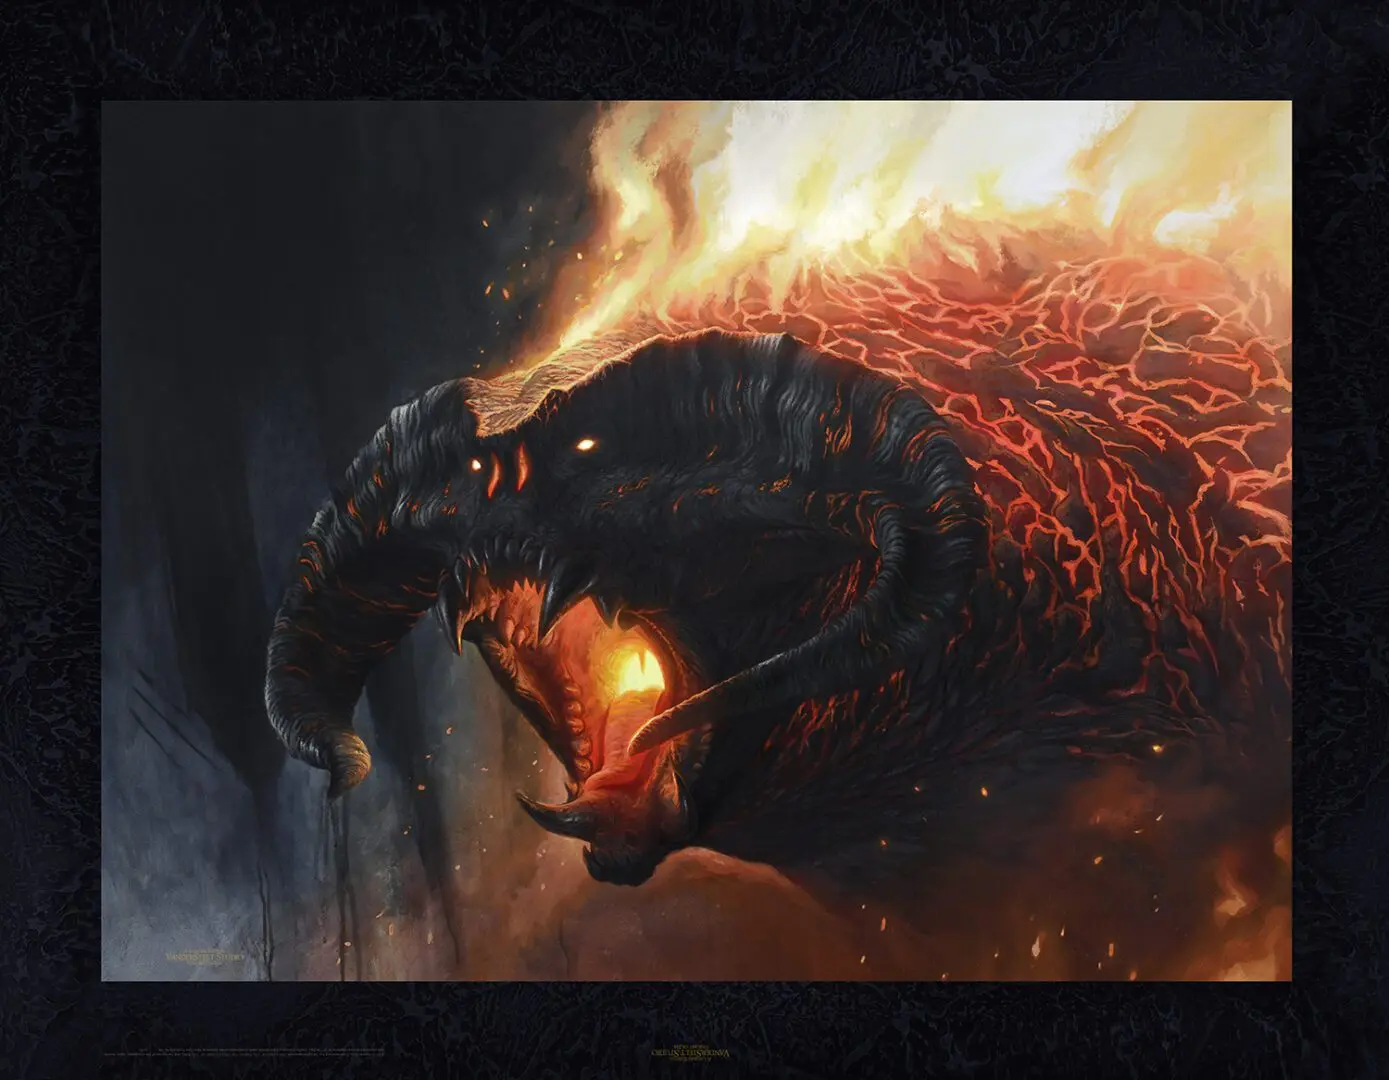 A painting of an evil looking creature with flames coming from it.